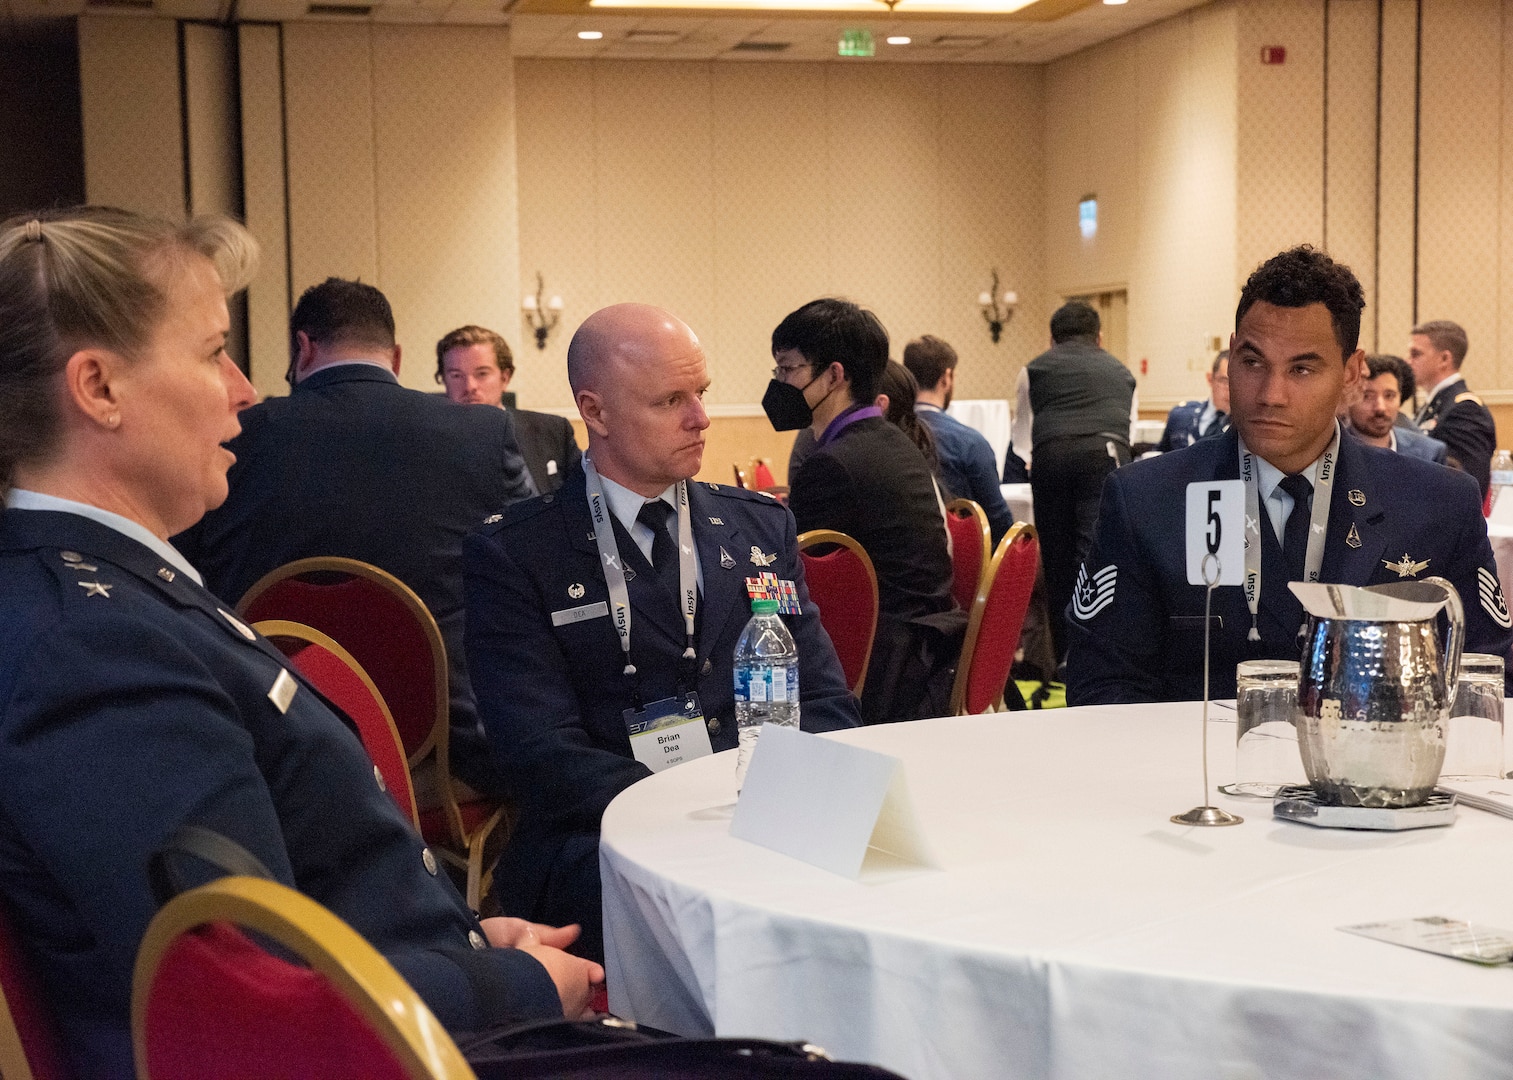 Tech Sgt. Kyle Lucas, 1st Space Operations Squadron Operations flight chief, speaks with senior leaders during the “New Generation Space Leaders: Leadership Exchange Speed Mentoring” on April 4, 2022, in Colorado Springs, Colorado.